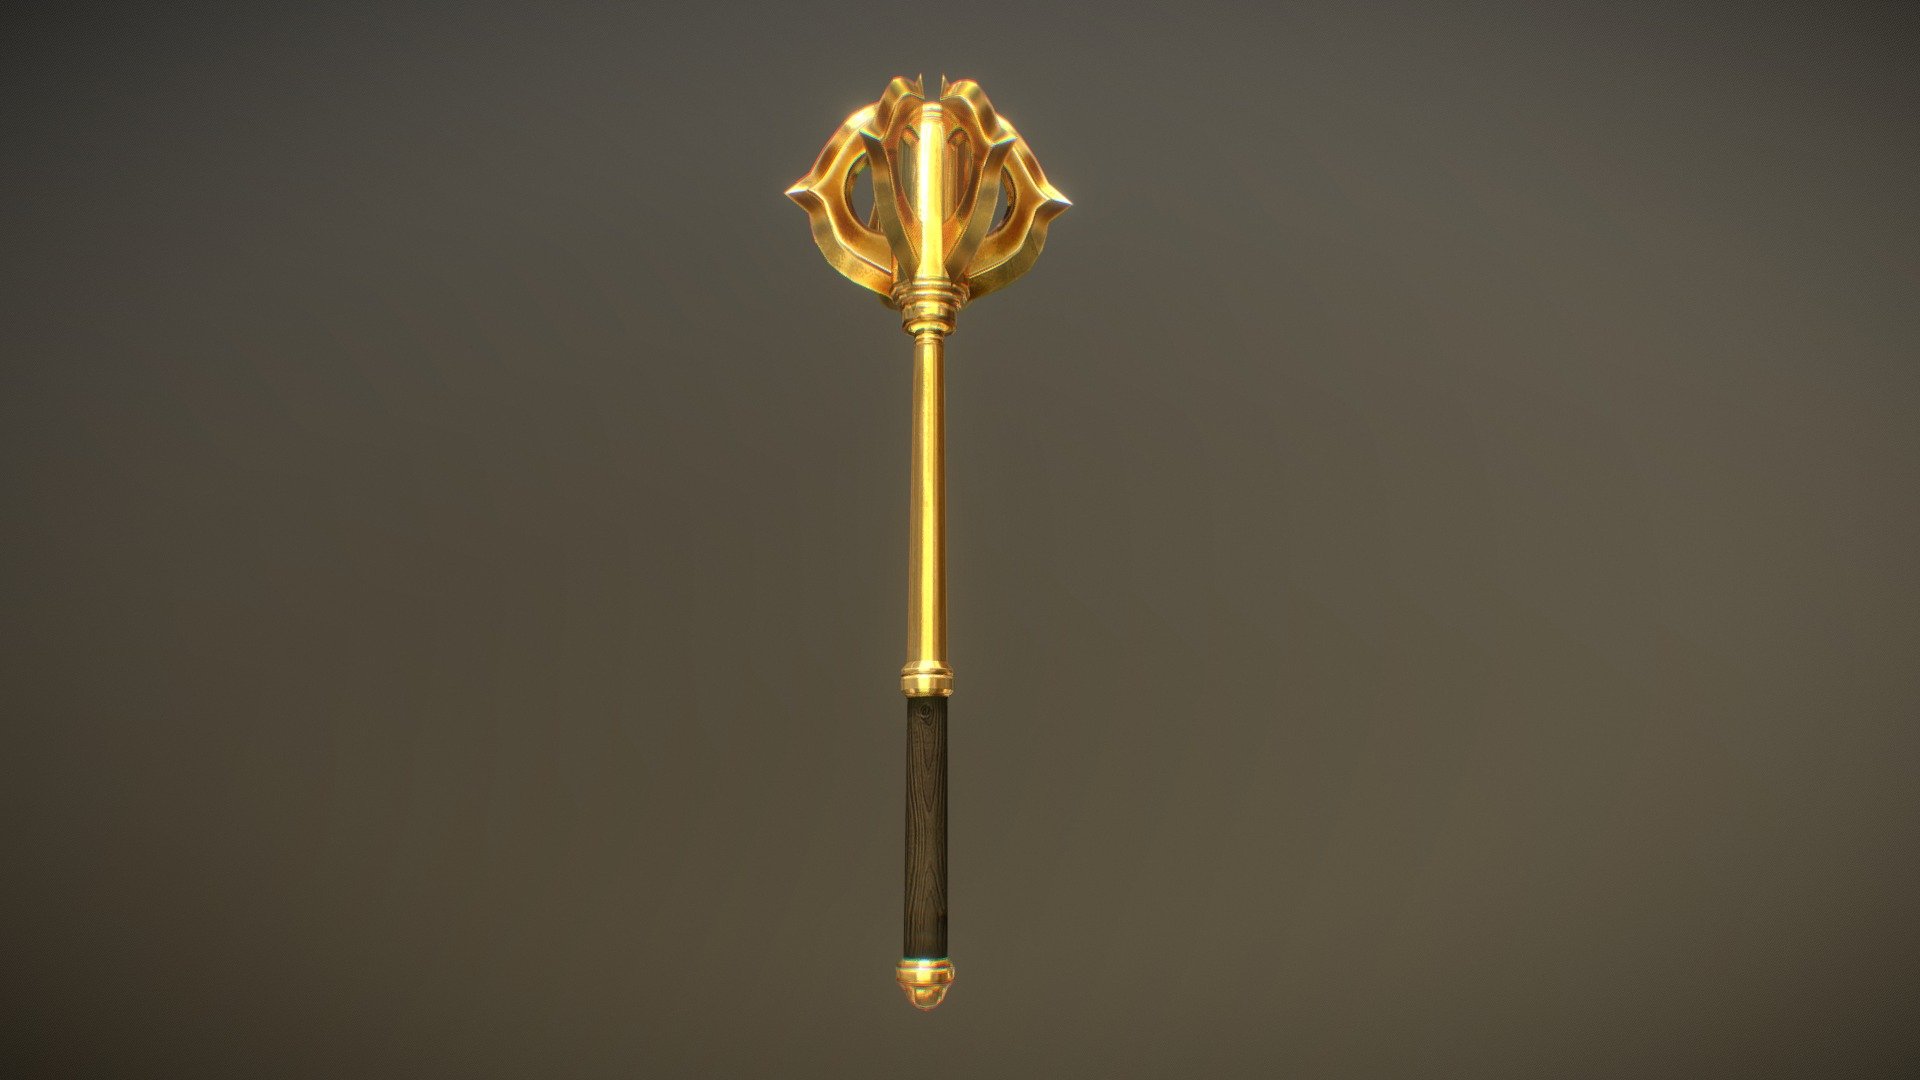 Beautiful golden mace ready for glorious battles.

Included textures are diffuse, normal, specular and gloss, all as 1024x1024 TGA.

The triangle count is 1452 3d model